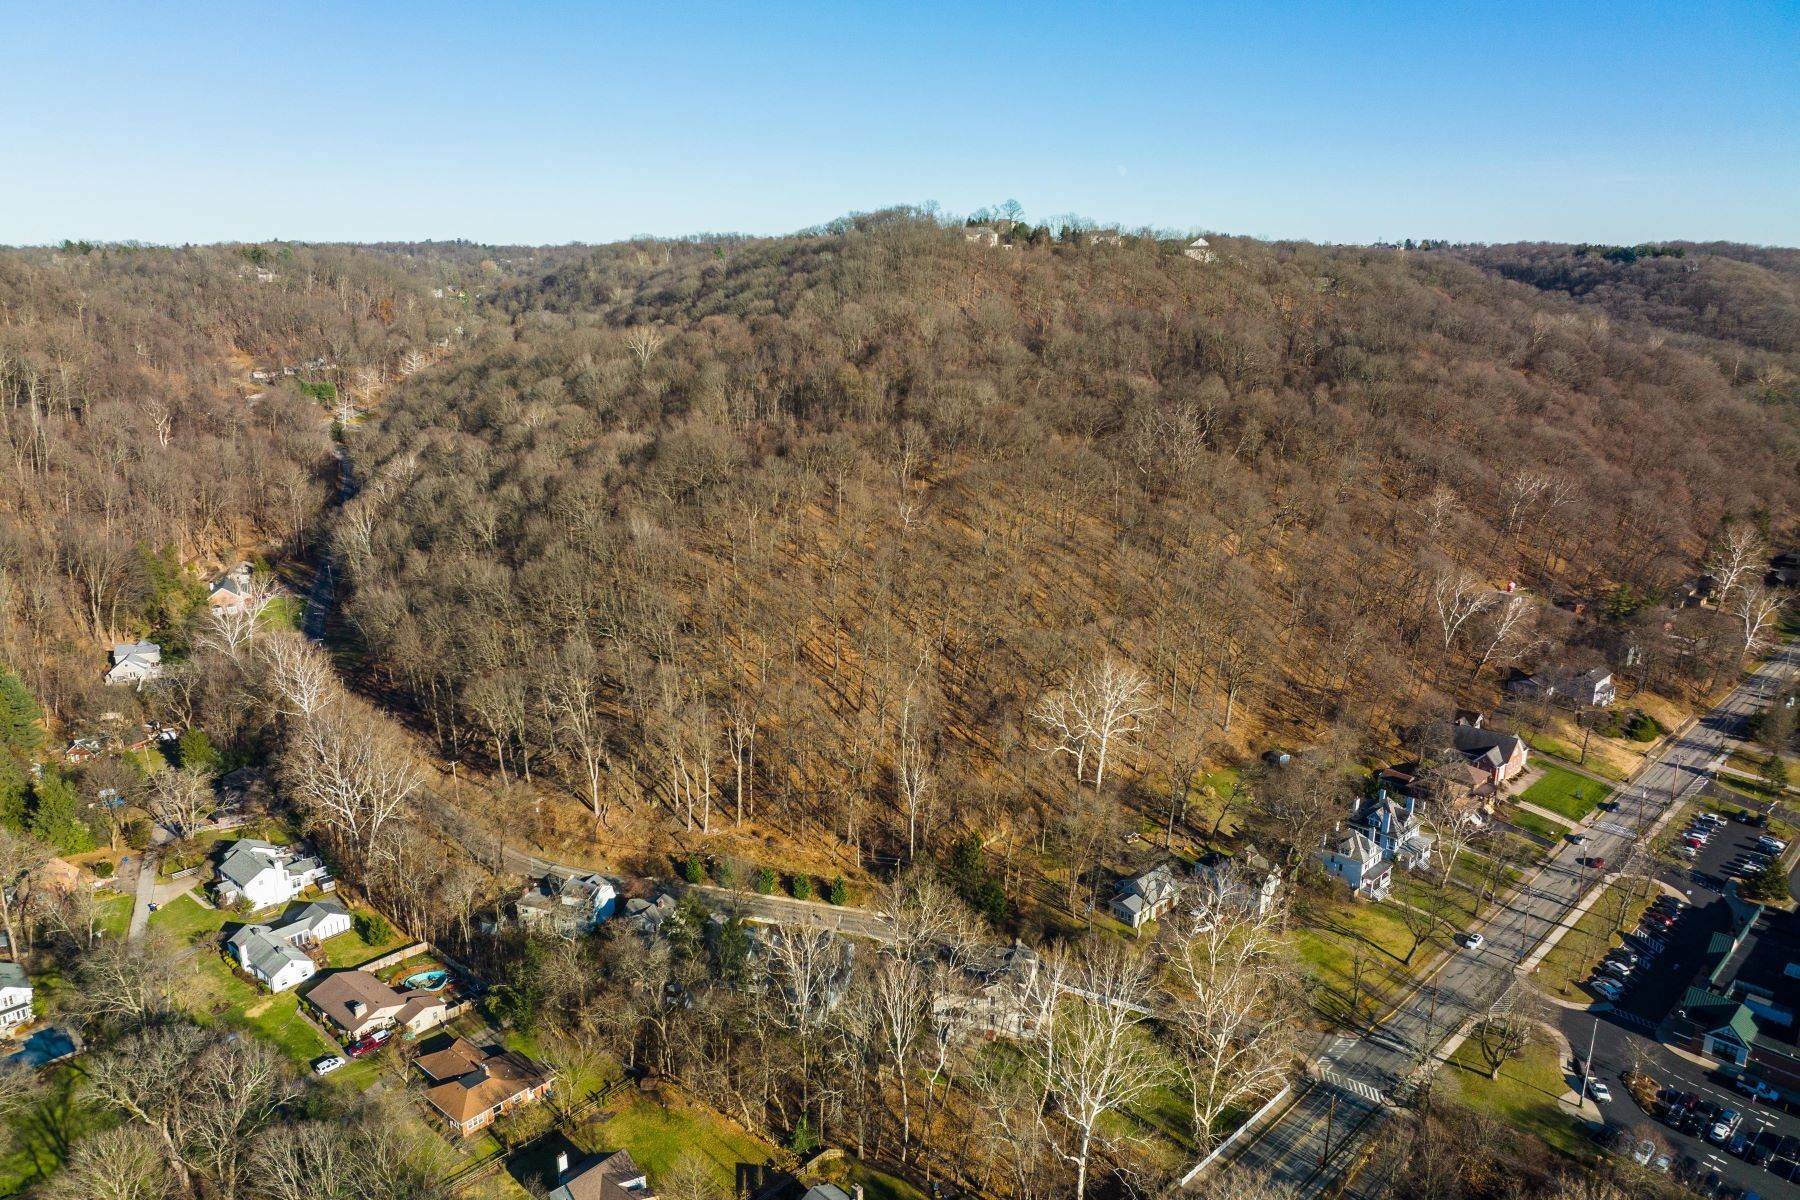 Land for Sale at Land to Build on in Sewickley Area 000 Beaver Street, Sewickley, Pennsylvania 15143 United States